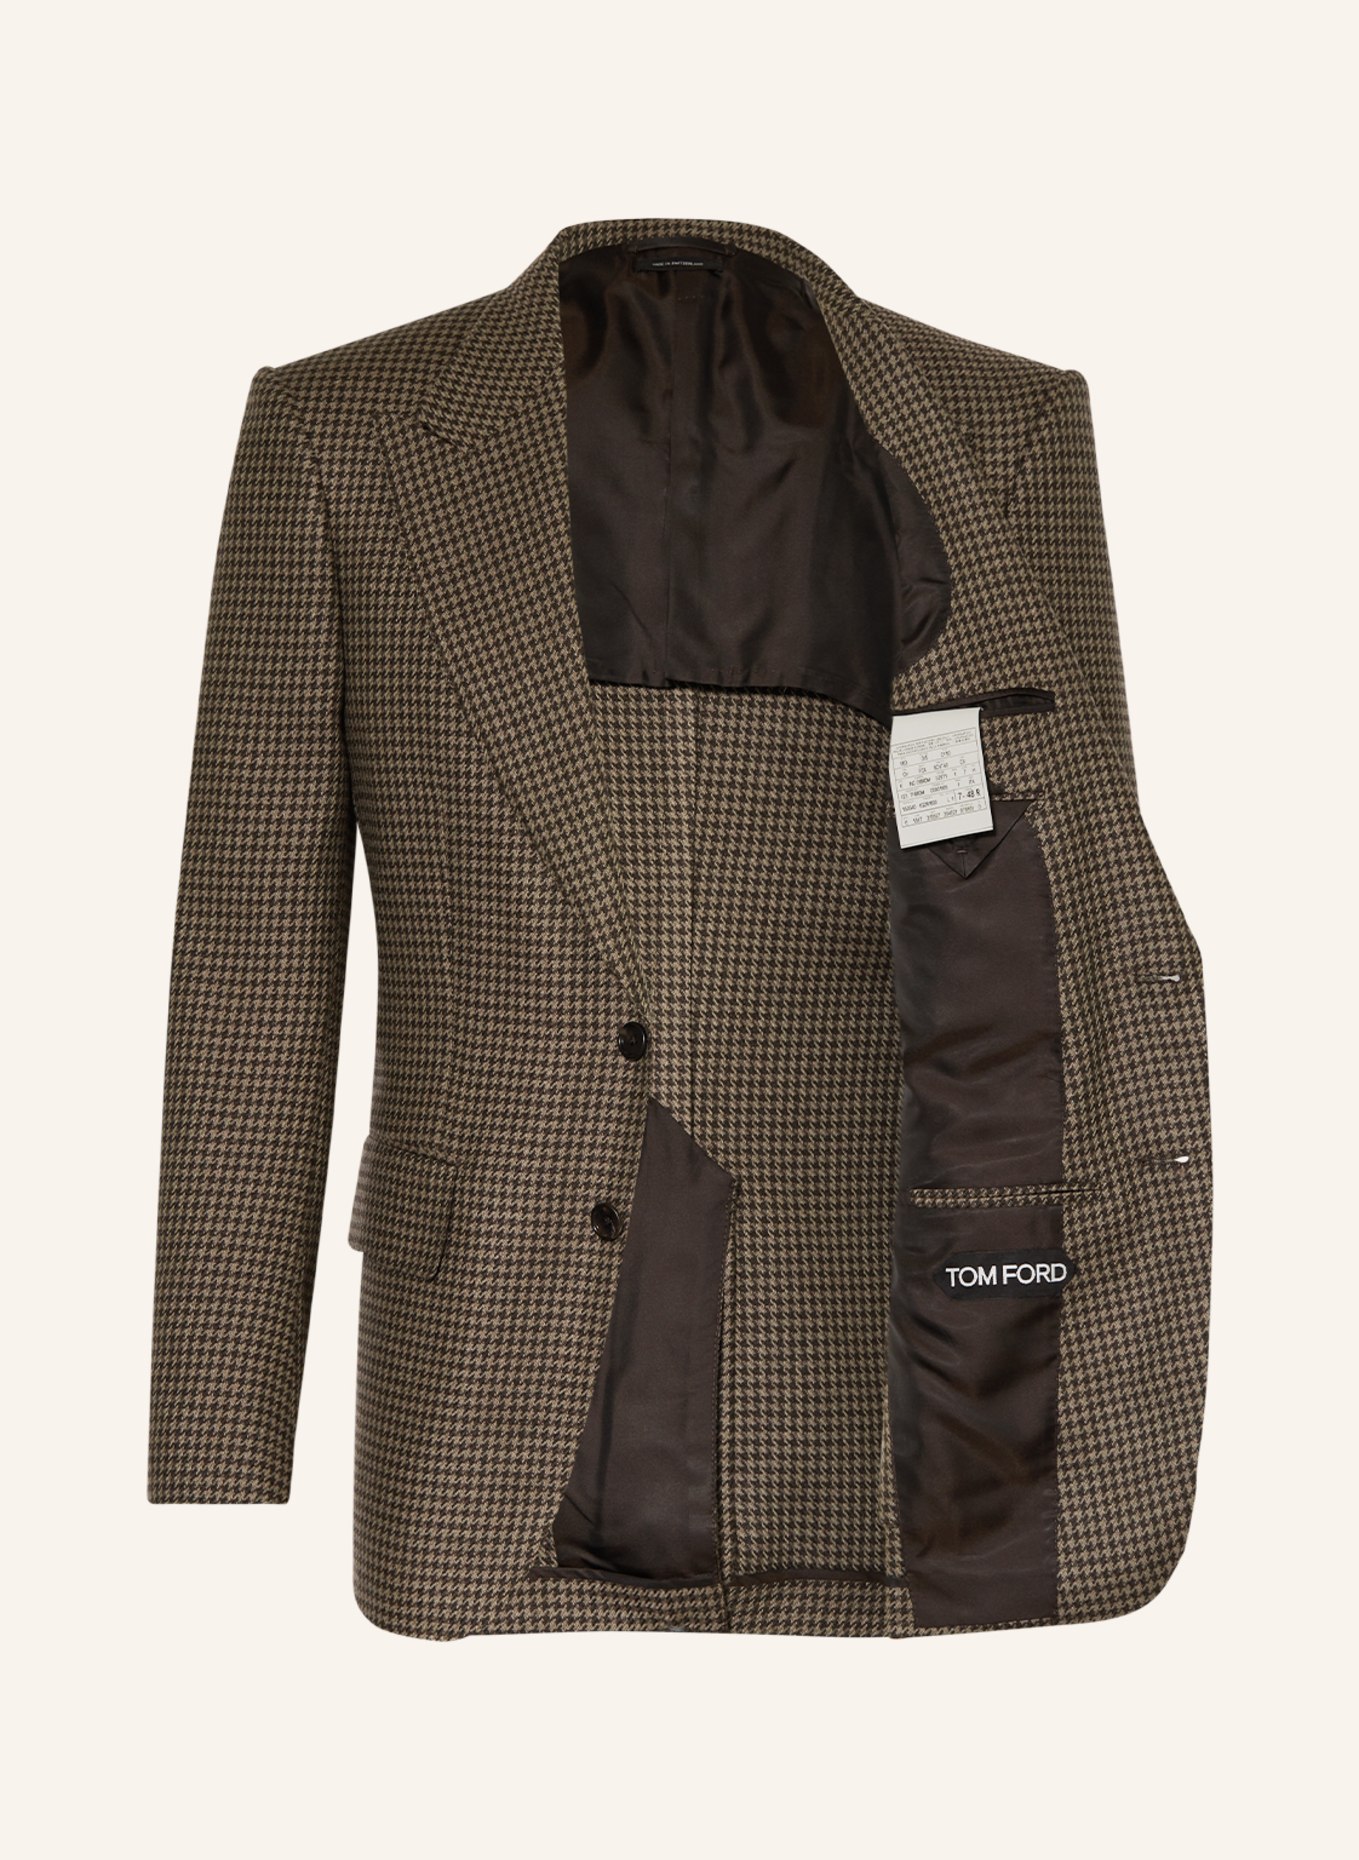 TOM FORD Suit jacket SHELTON extra slim fit with mohair, Color: BROWN/ DARK BROWN/ LIGHT BROWN (Image 4)